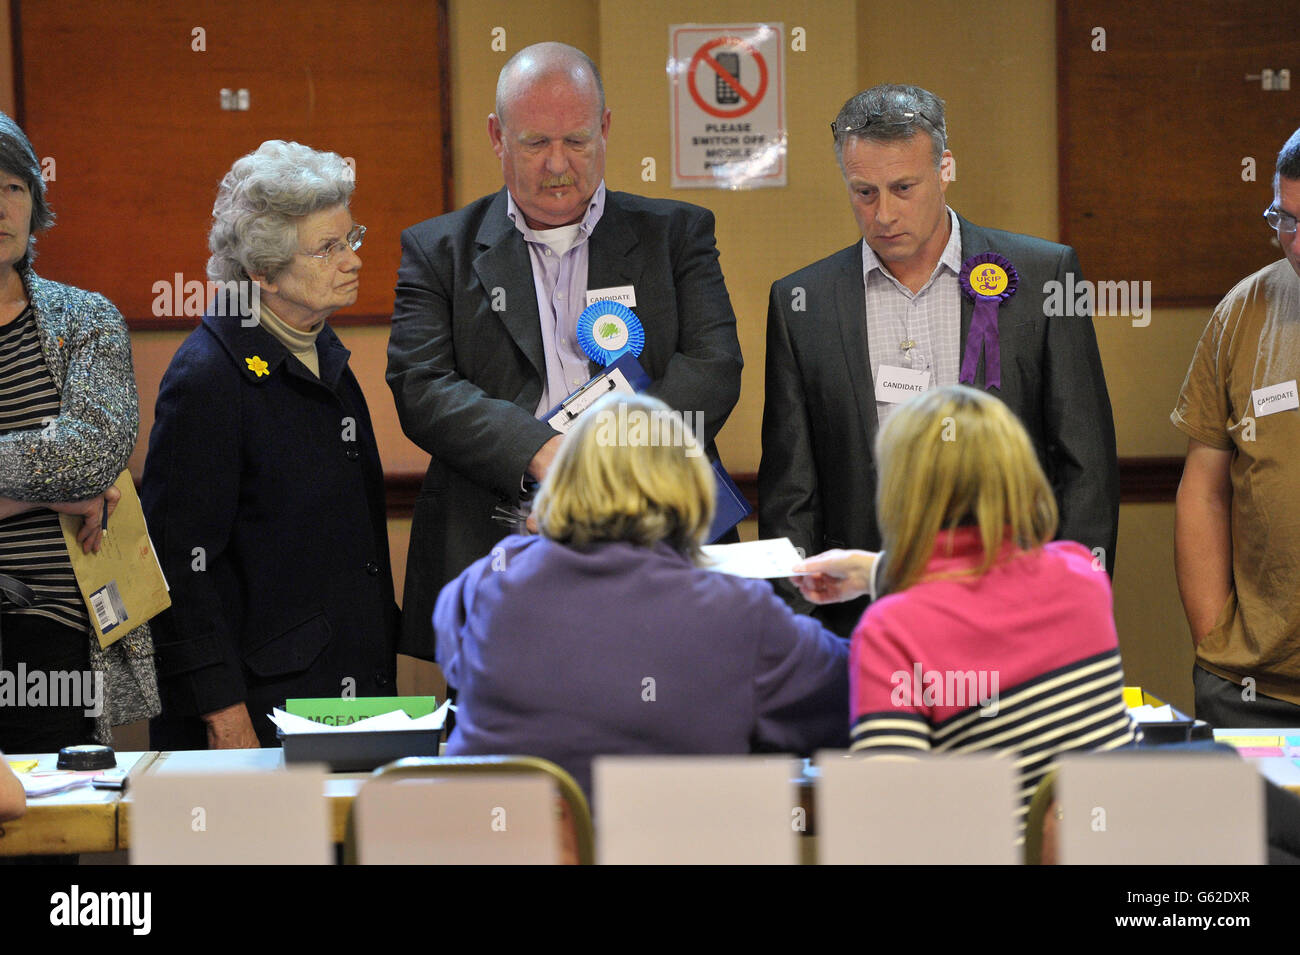 Candidates watch as votes are counted at Oaklands Snooker Club in Cinderford, Gloucestershire for the Gloucestershire districts. Stock Photo